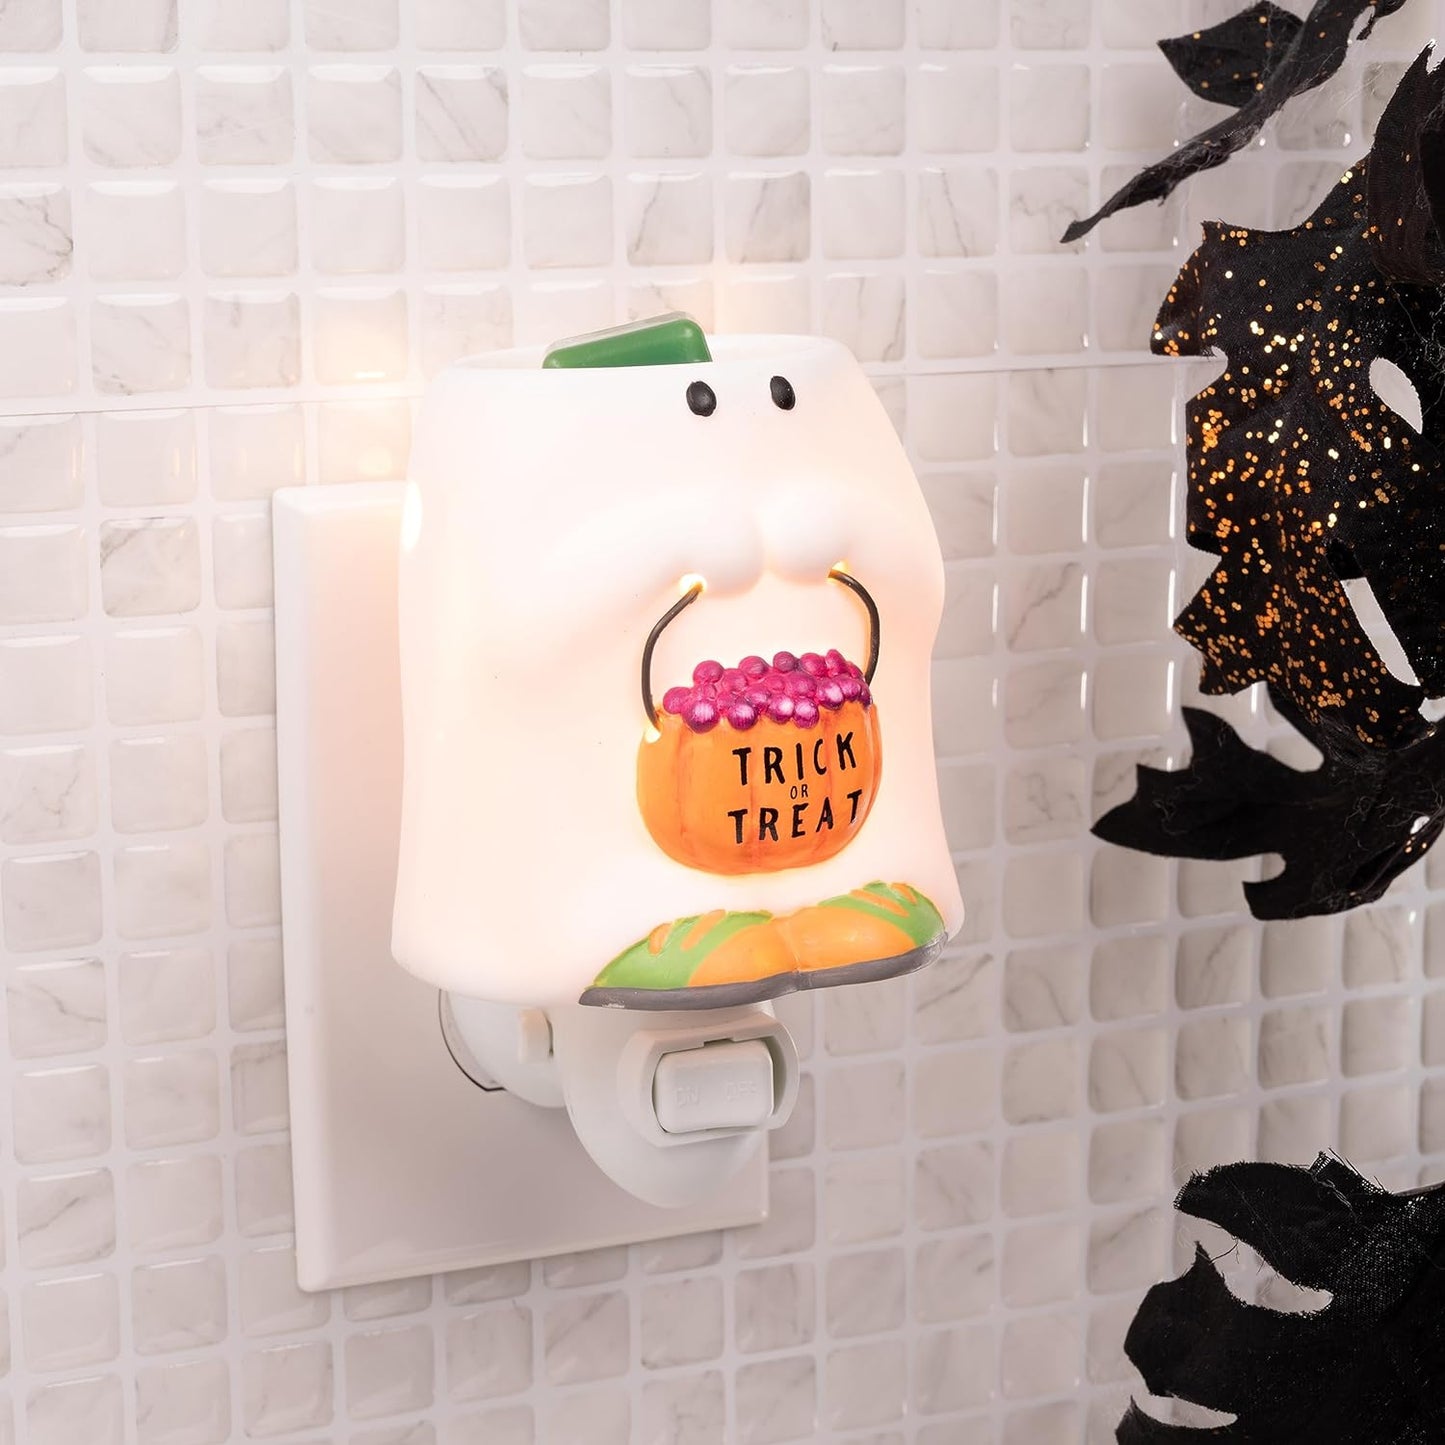 Scentsationals Day of The Dead Collection Scented Wax Cube Warmer Wax Melt Fragrance Melter - Electric Home Air Freshener Home Decor Candle Replacement Dia de Los Muertos Decorations Corona De Flores